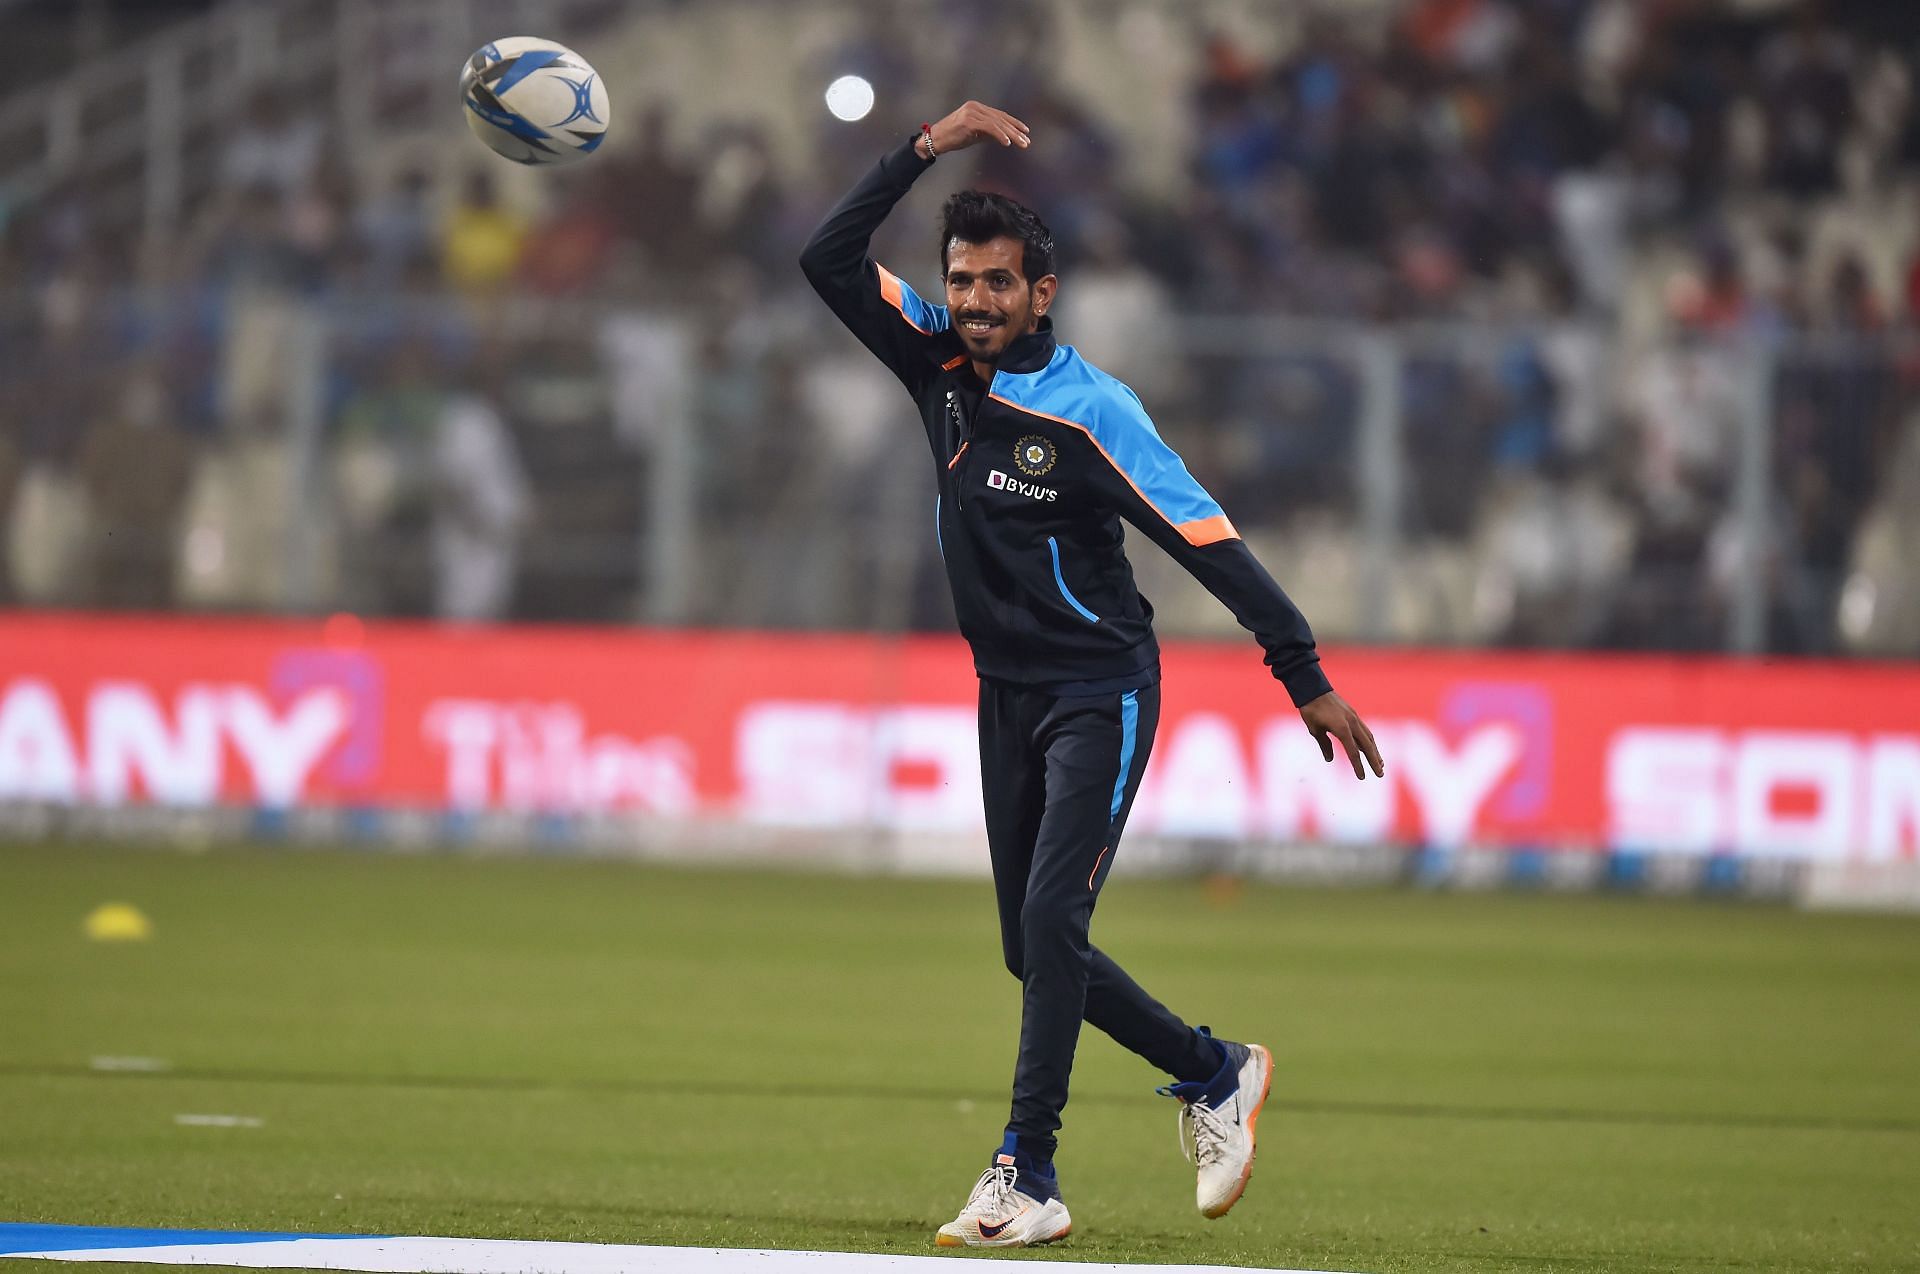 India will continue to back Yuzvendra Chahal, and he needs to find his bearings